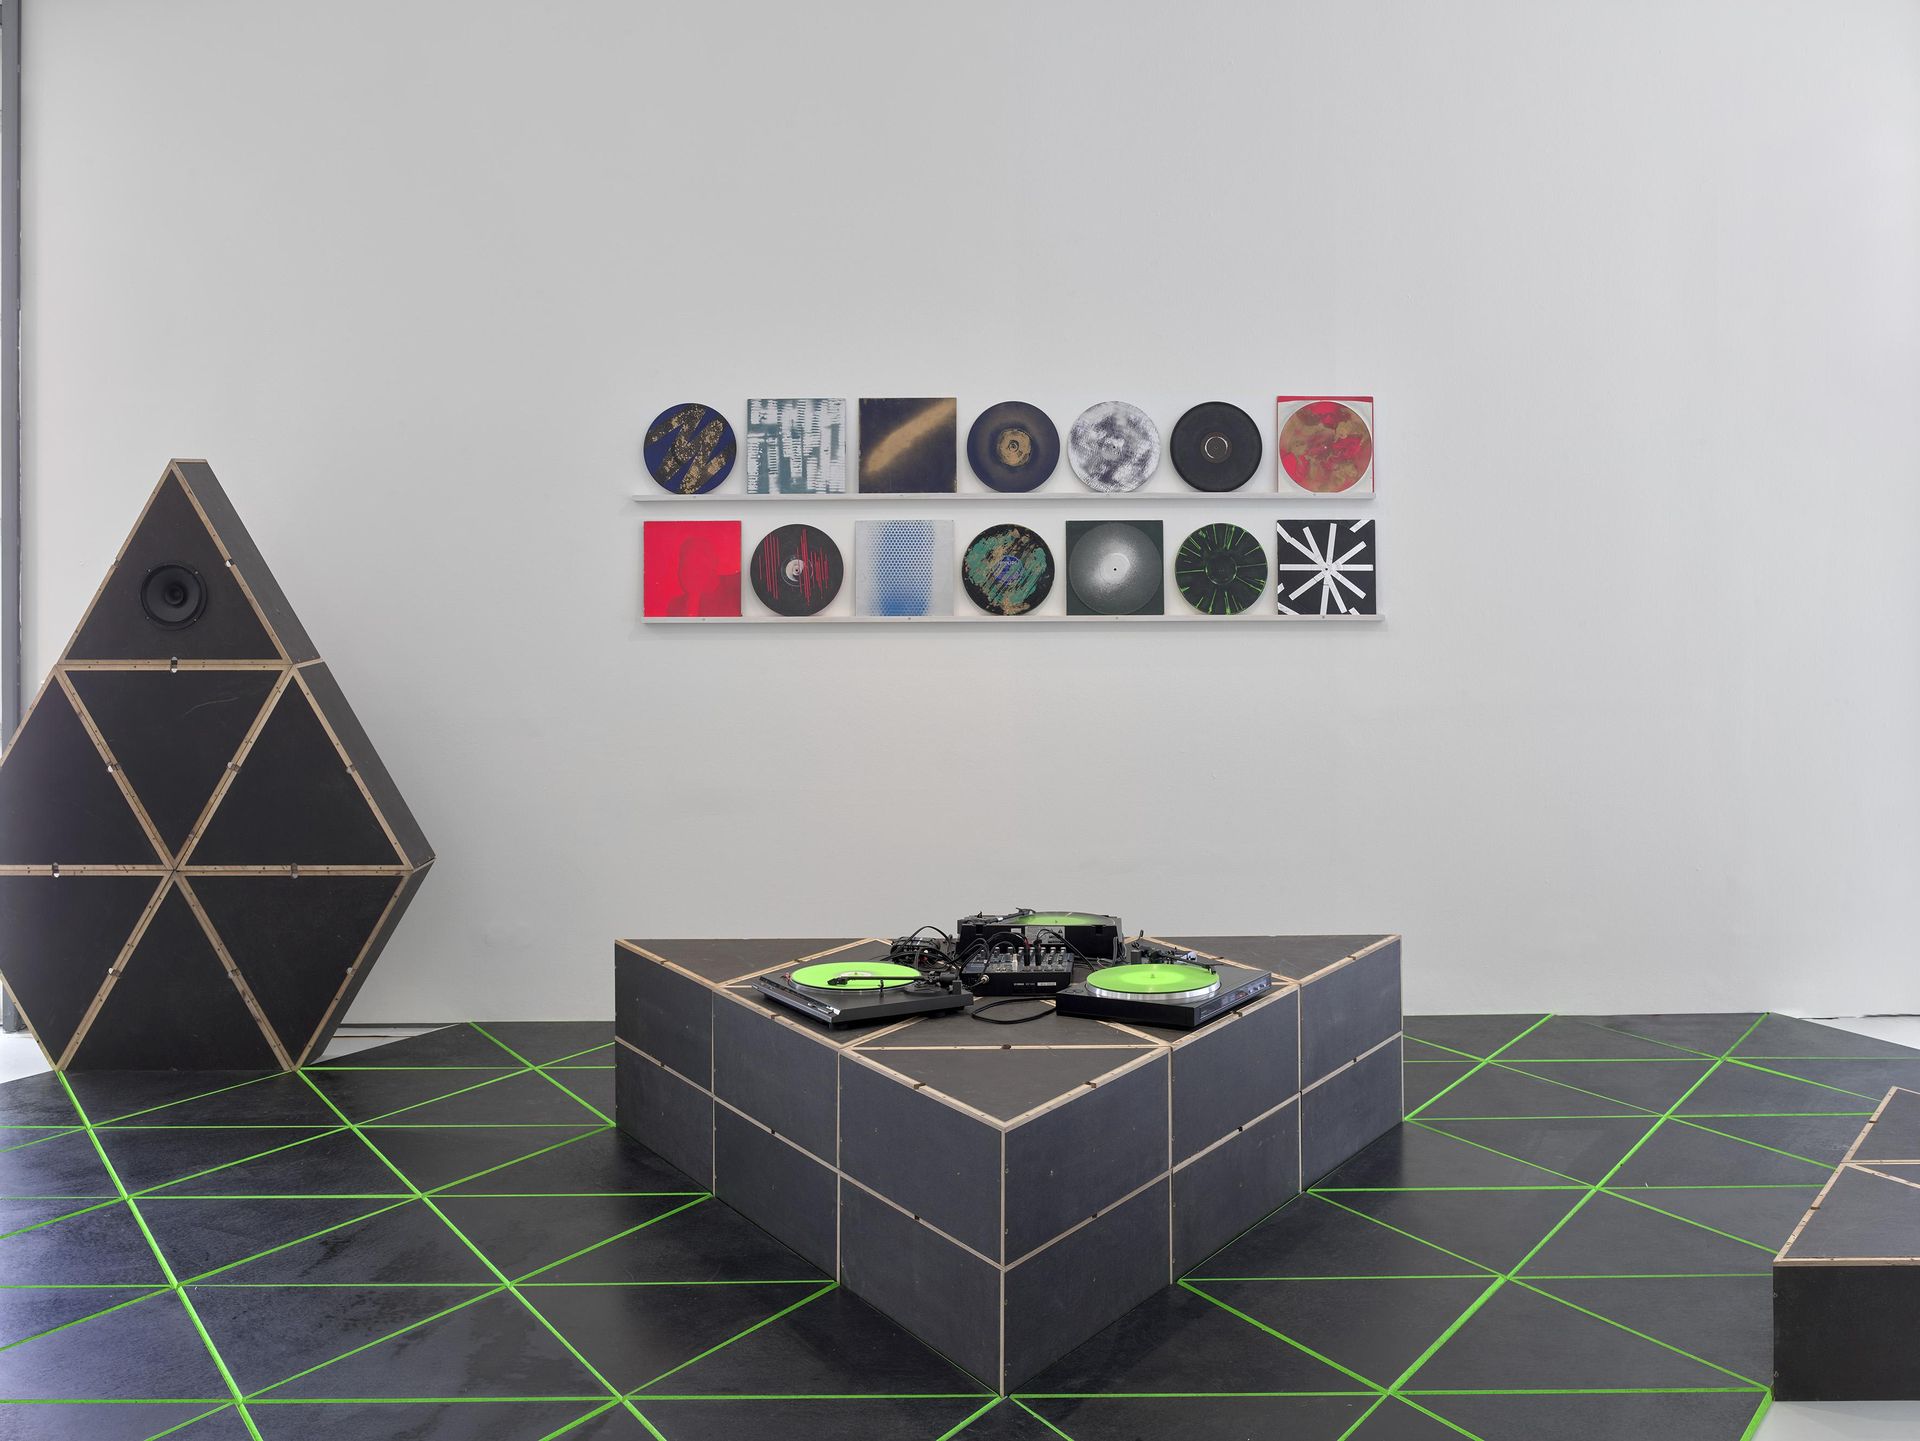 Julia Bünnagel, Structure, since 2014, dimensions variable, mixed media, Courtesy: the artist & Galerie Rupert Pfab